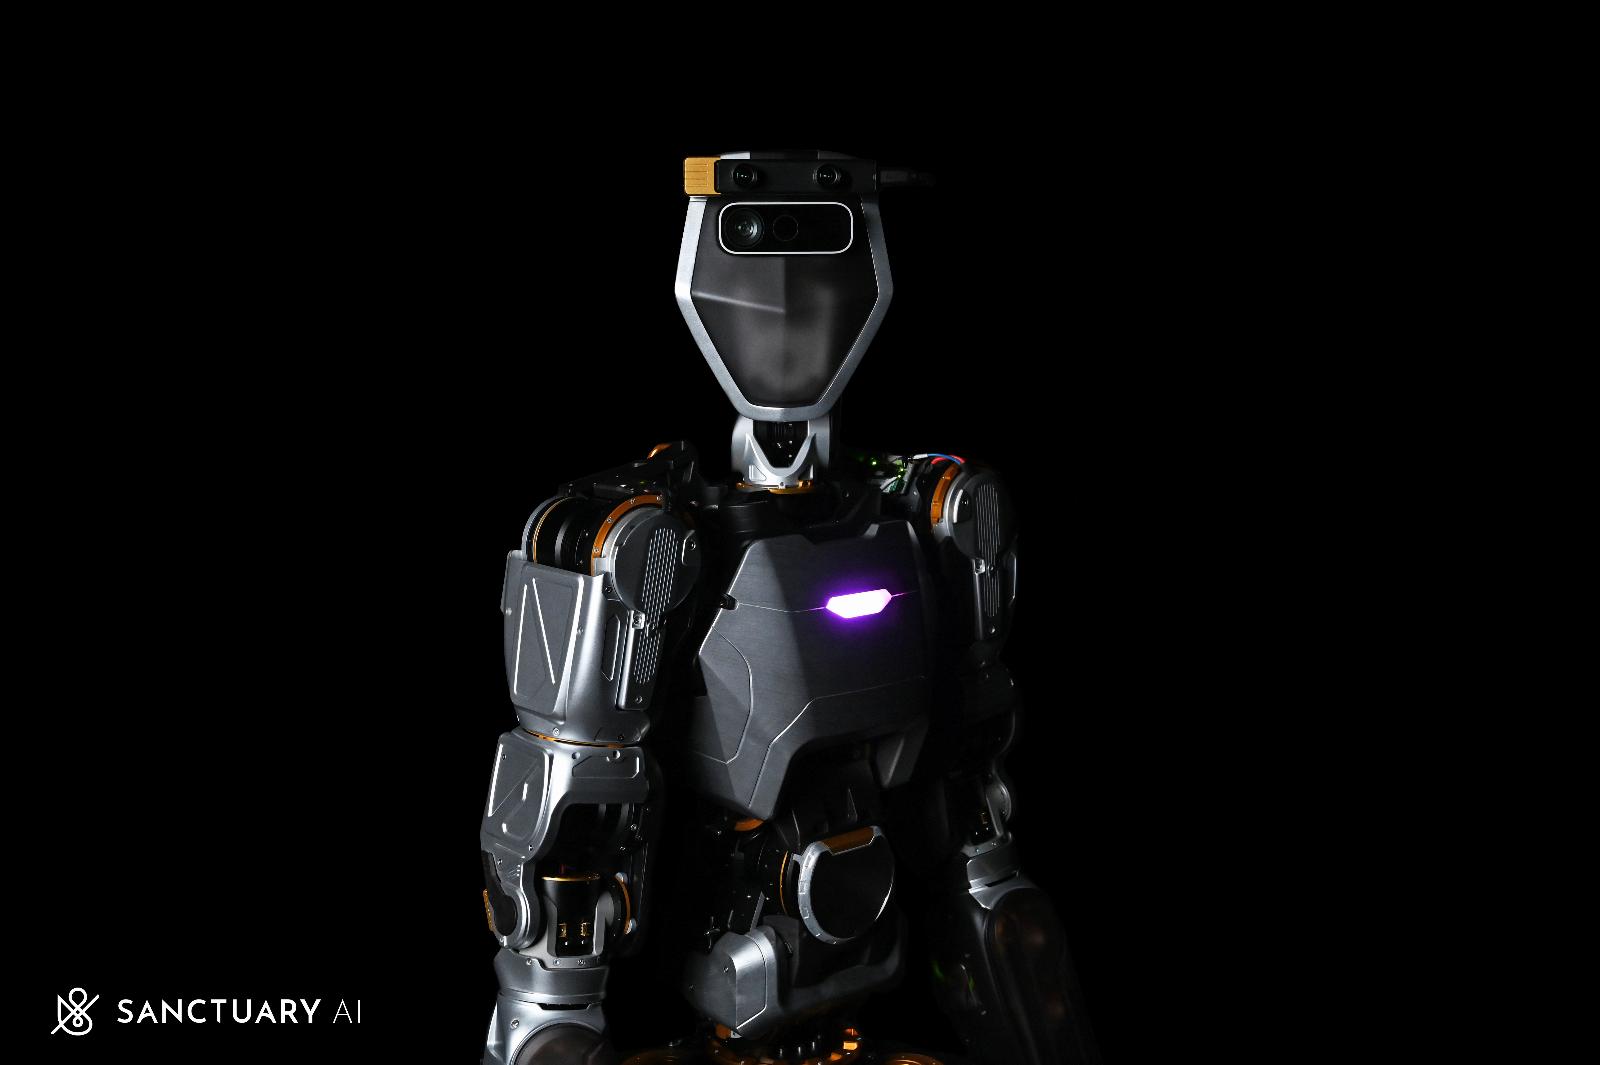 Sanctuary AI’s new humanoid robot stands 5’7″ and lifts 55 lb